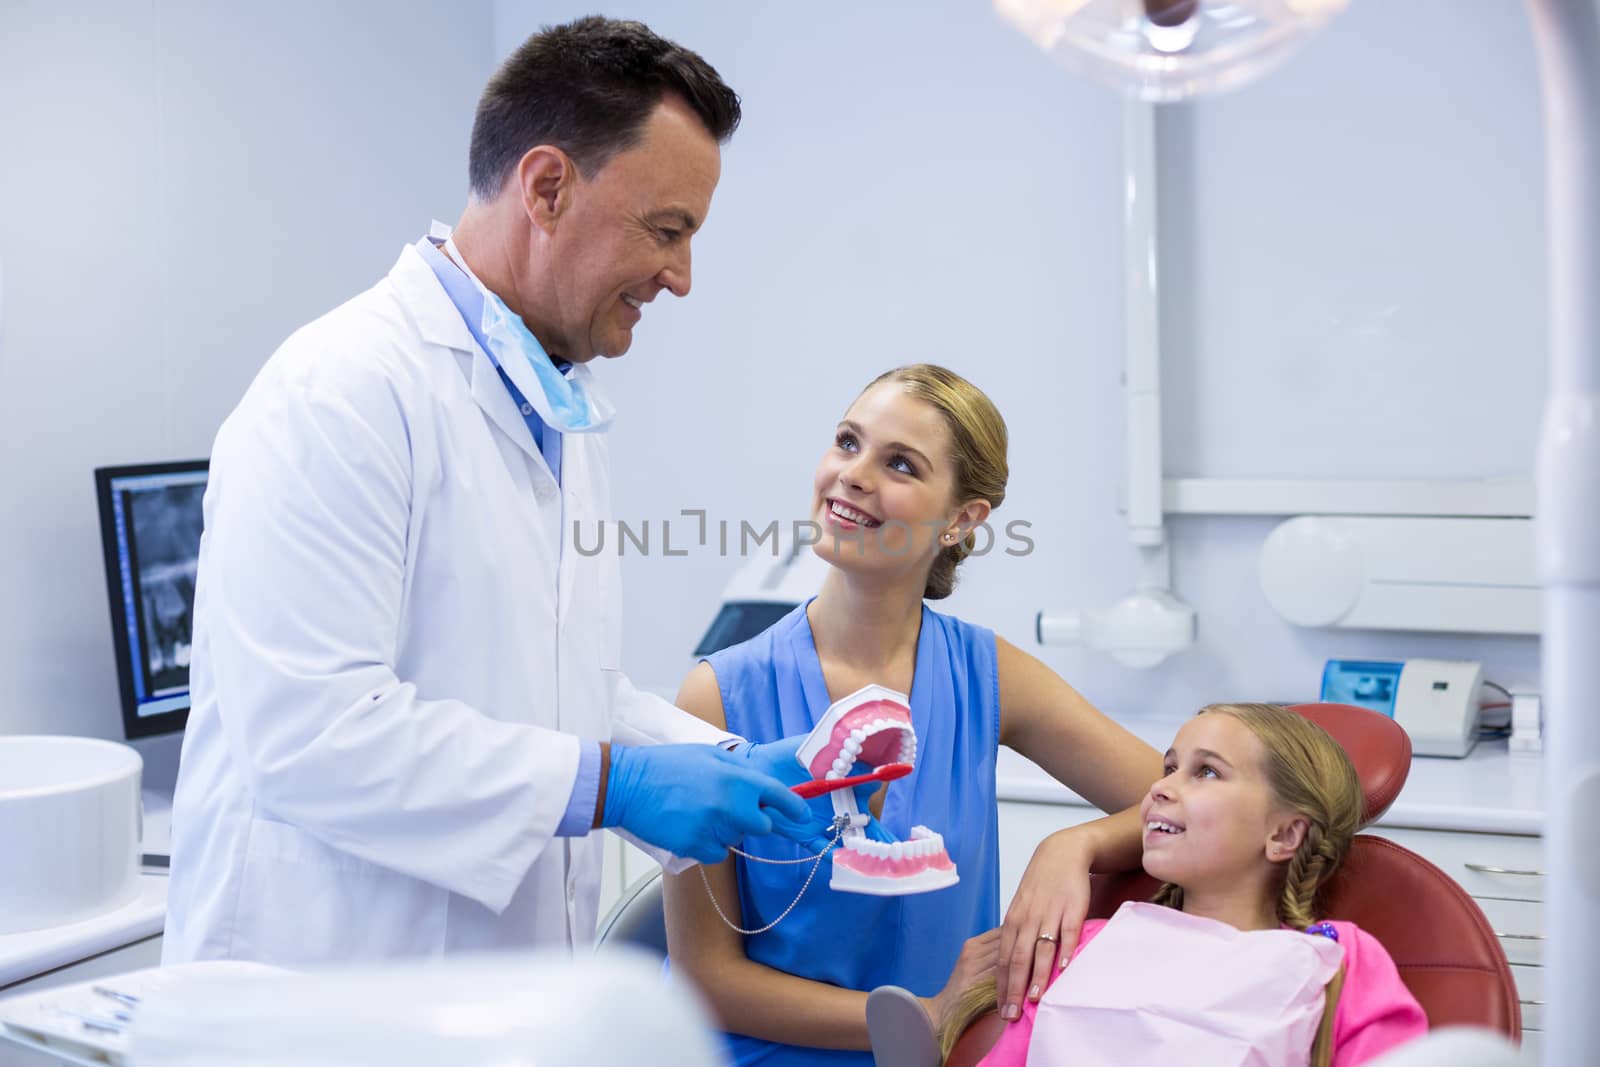 Dentist showing young patient how to brush teeth by Wavebreakmedia